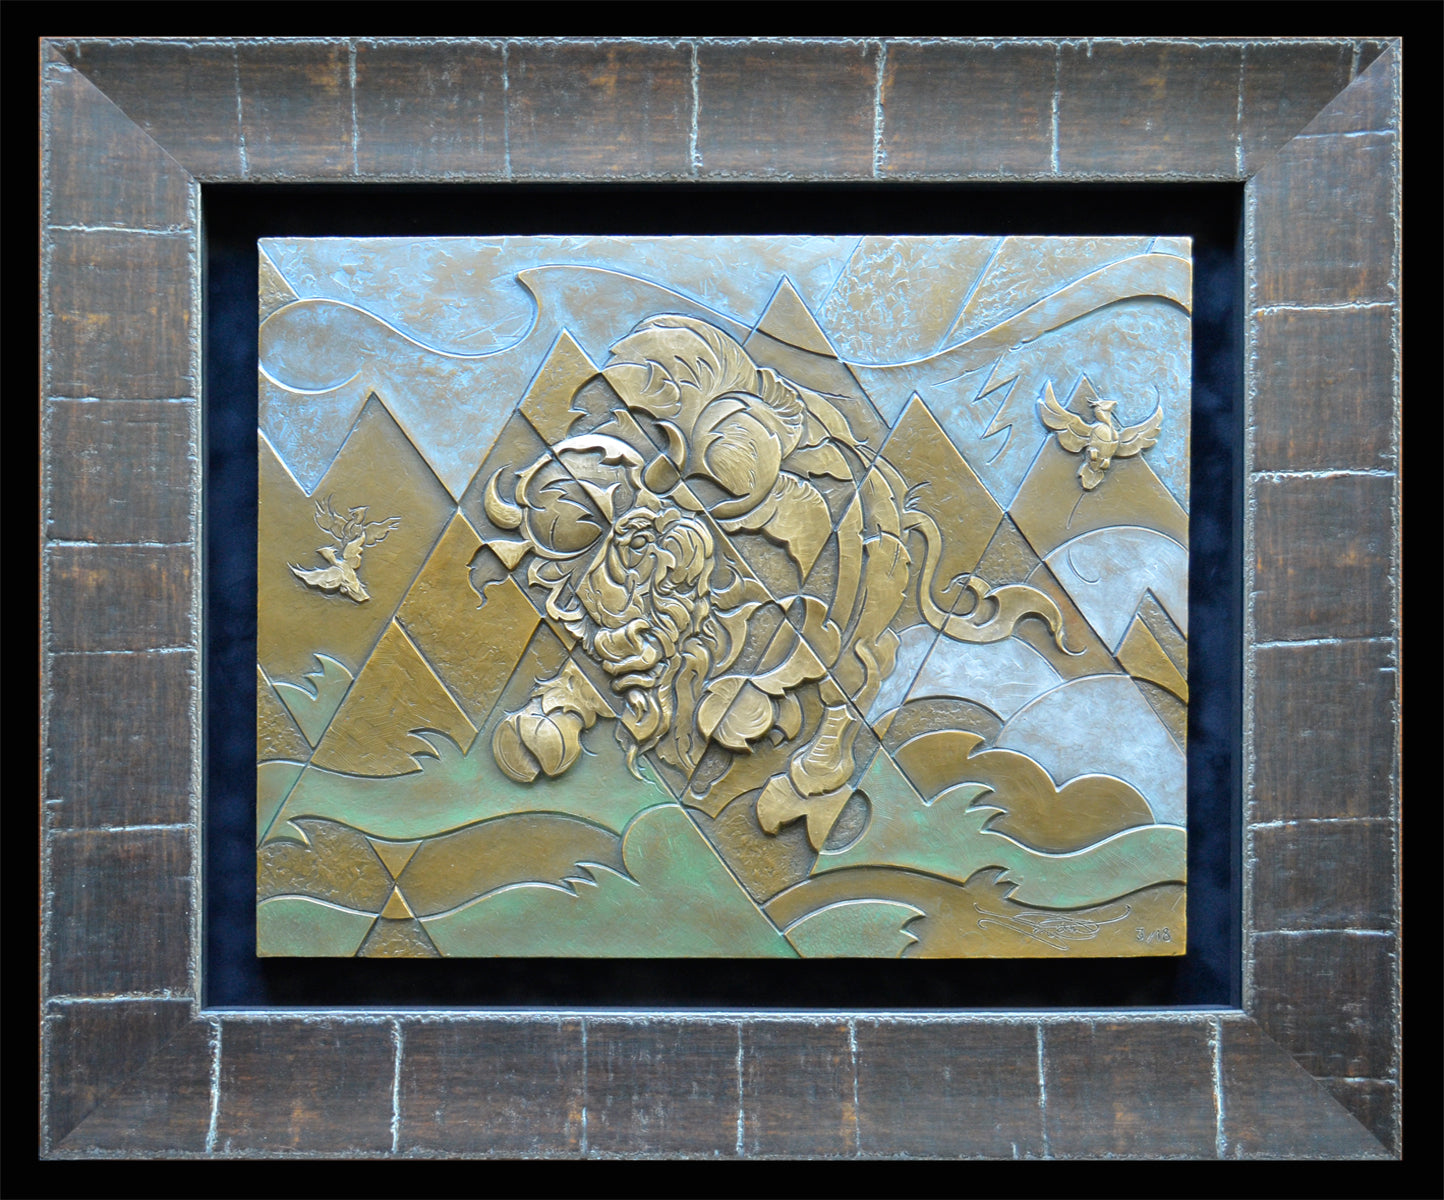 Thunder, Hooves and Prairie Chickens - A Grassland Percussive - JD WELSH - low relief bronze - 14.75 x 17.75"